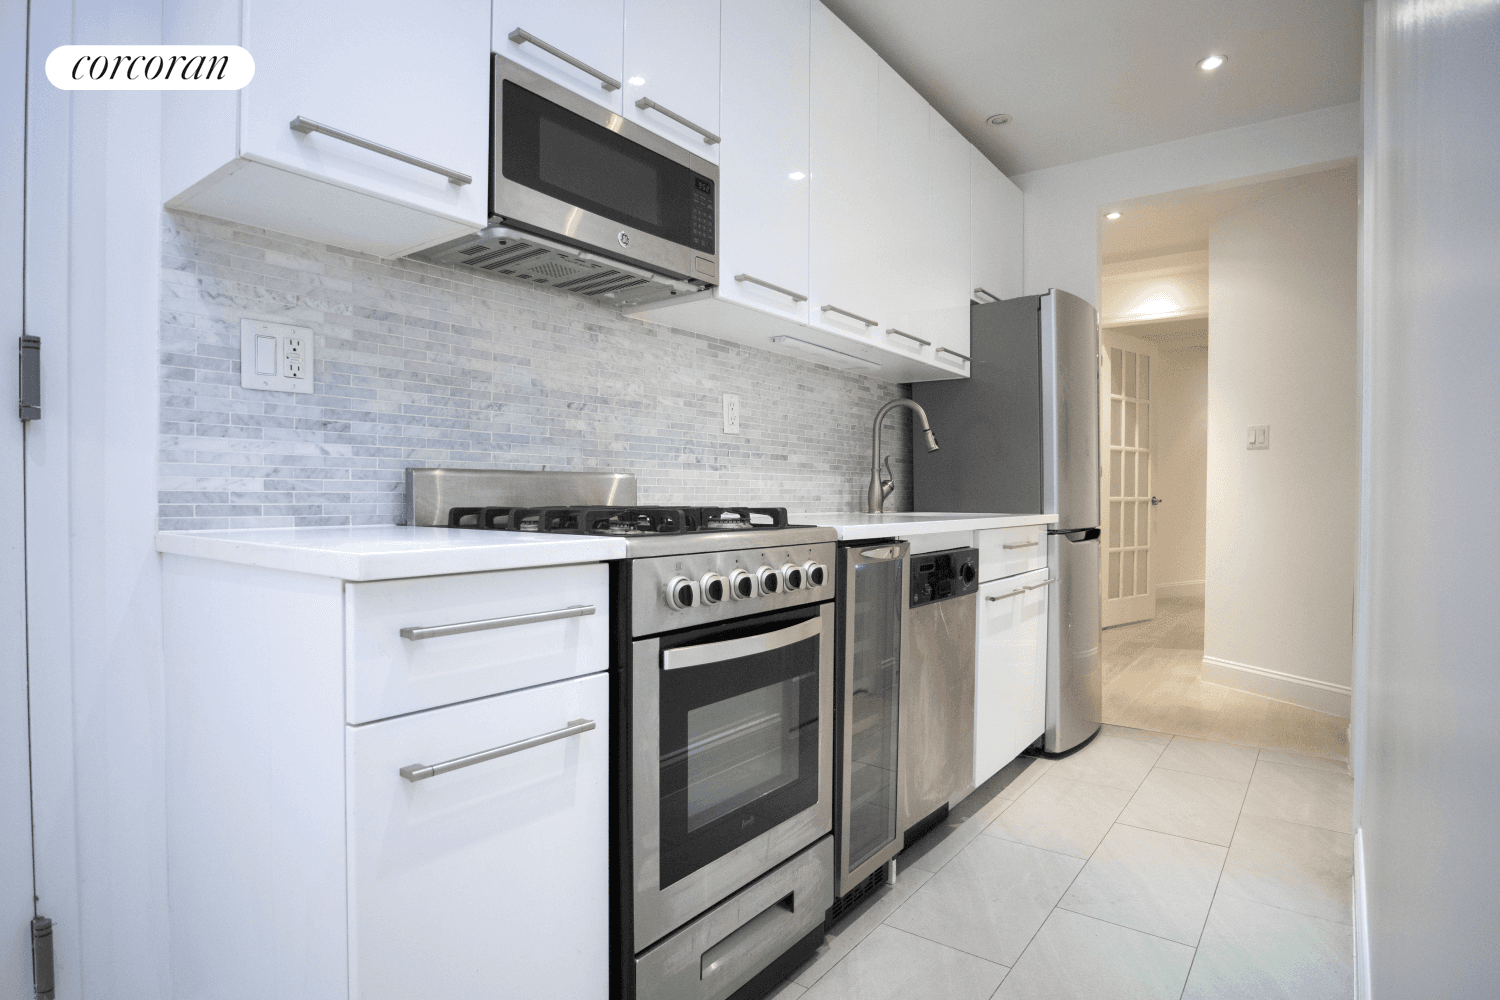 Situated in Prime Flatiron location, in boutique building right by Madison Square Park 3 bedroom, 1 bath with washer dryer in unit.